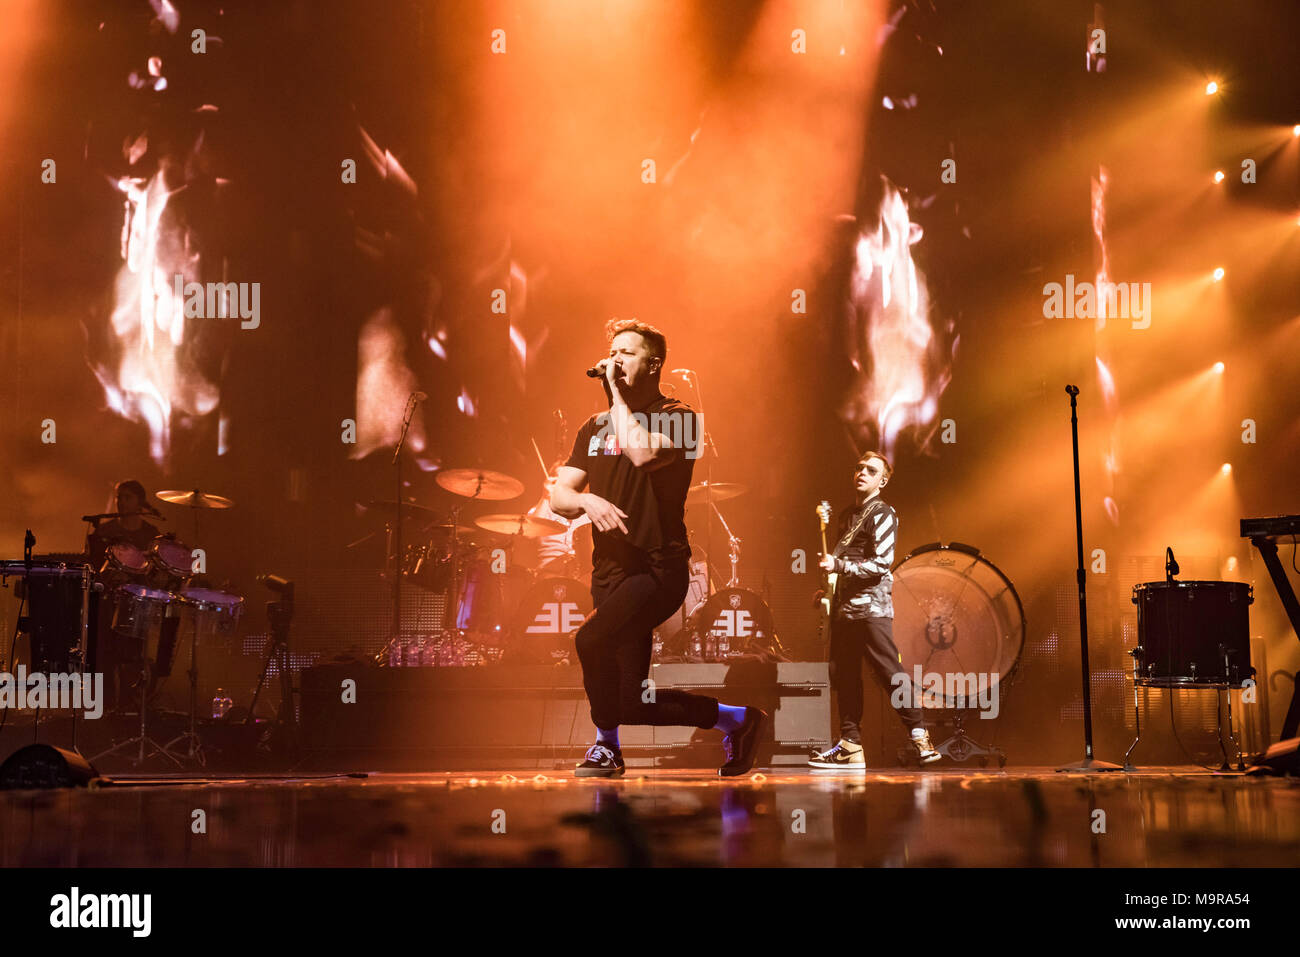 Imagine Dragons perform to an adoring Glasgow crowd at the SSE Hydro, big performance from band and crowd. Stock Photo